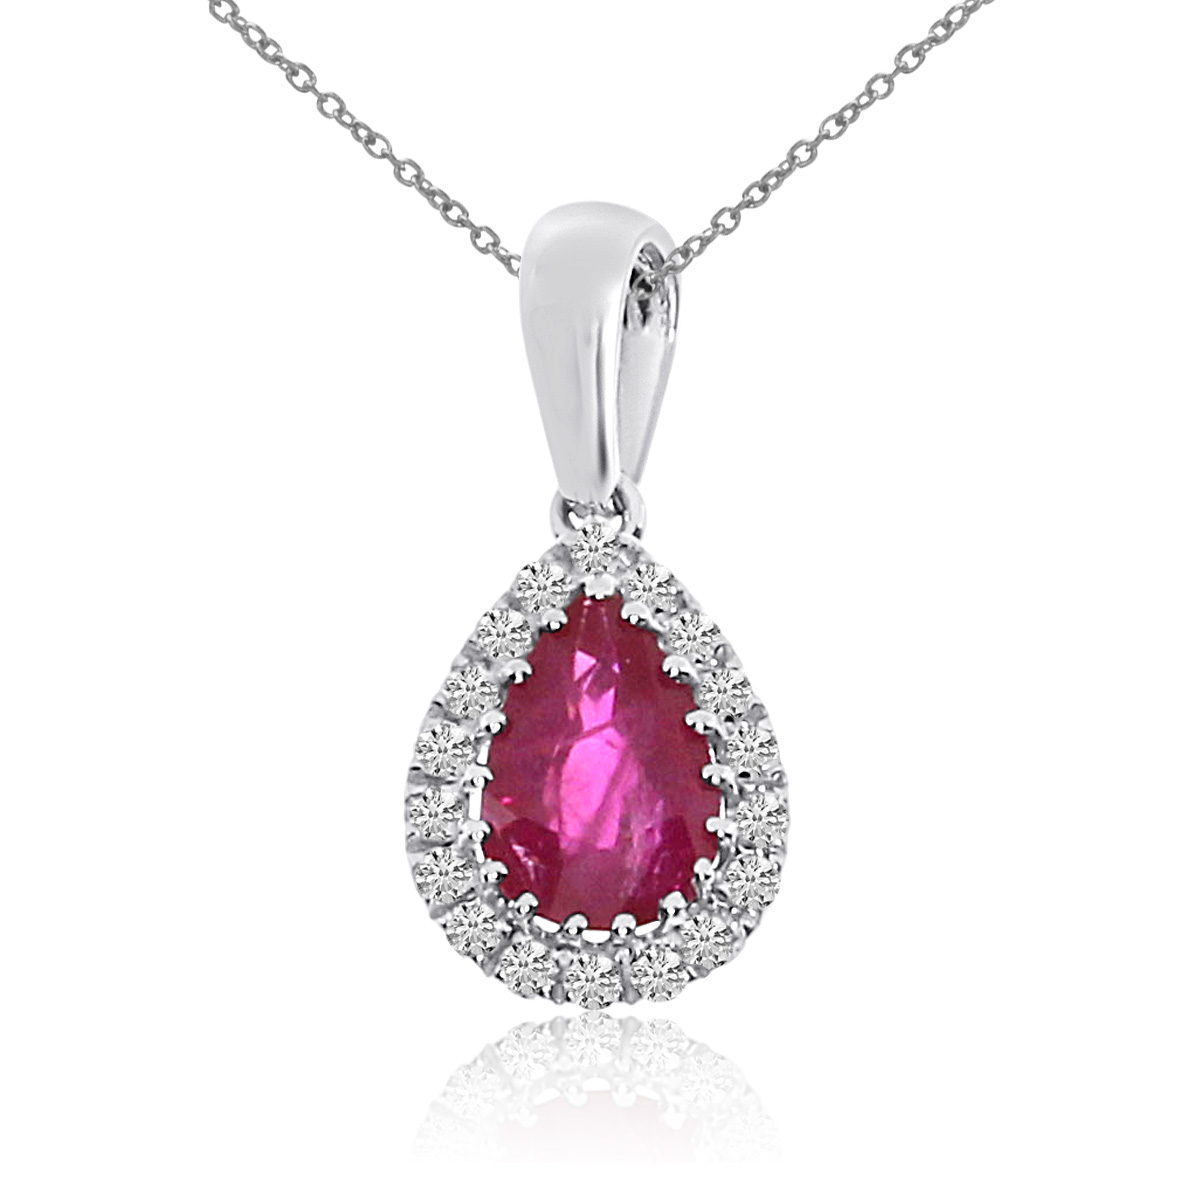 6x4 mm pear shaped ruby pendant with shimmering diamonds set in 14k white gold.